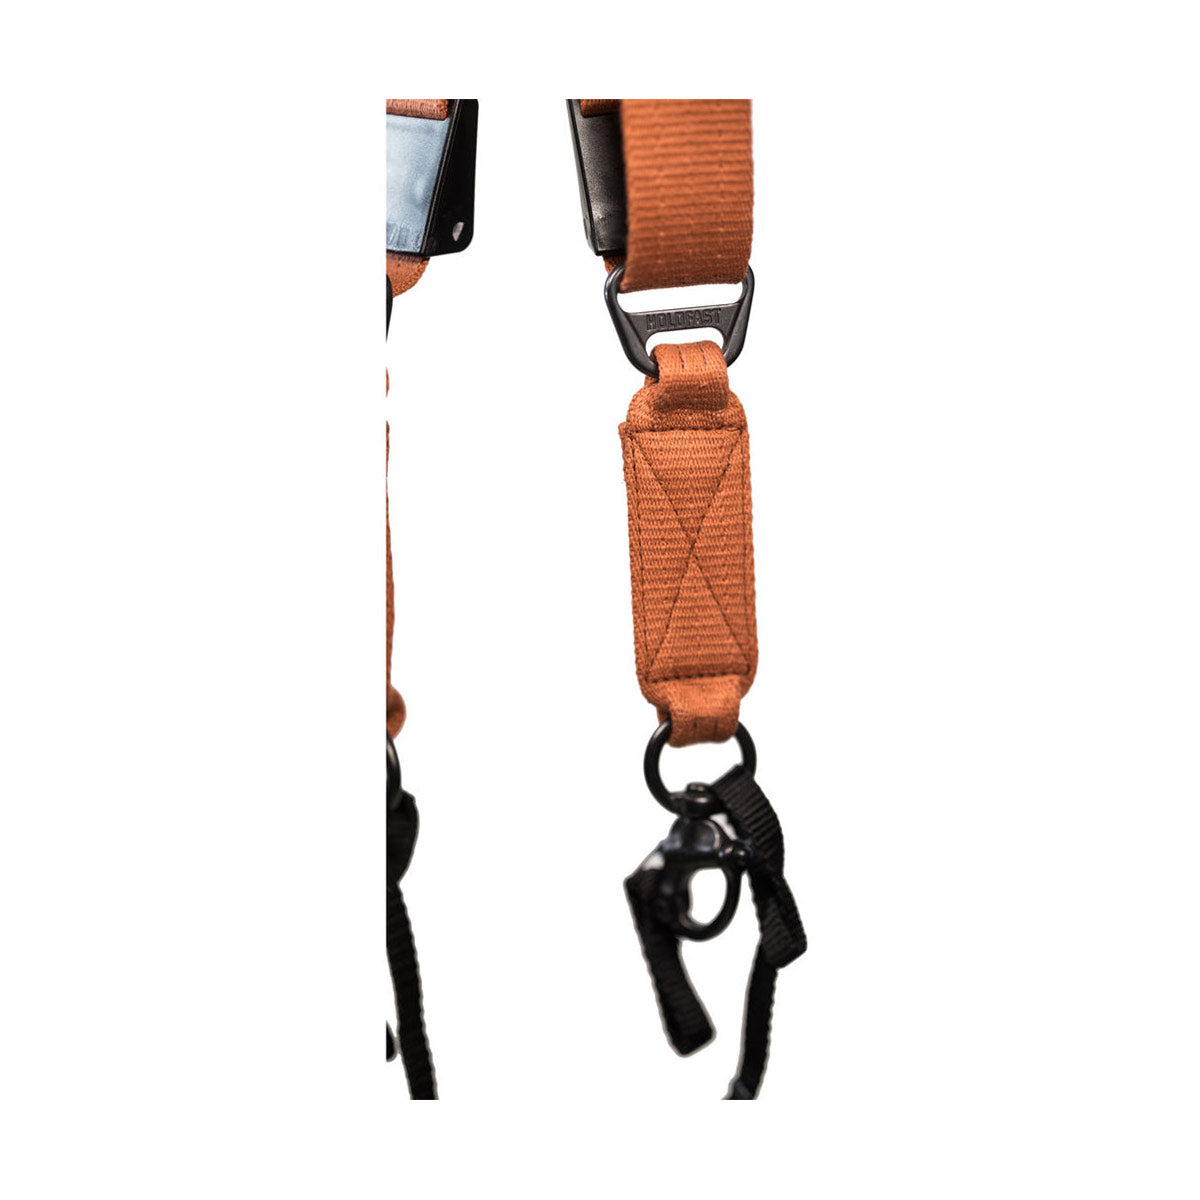 HoldFast Money Maker Two-Camera Swagg Harness (Cotton Canvas Copper)